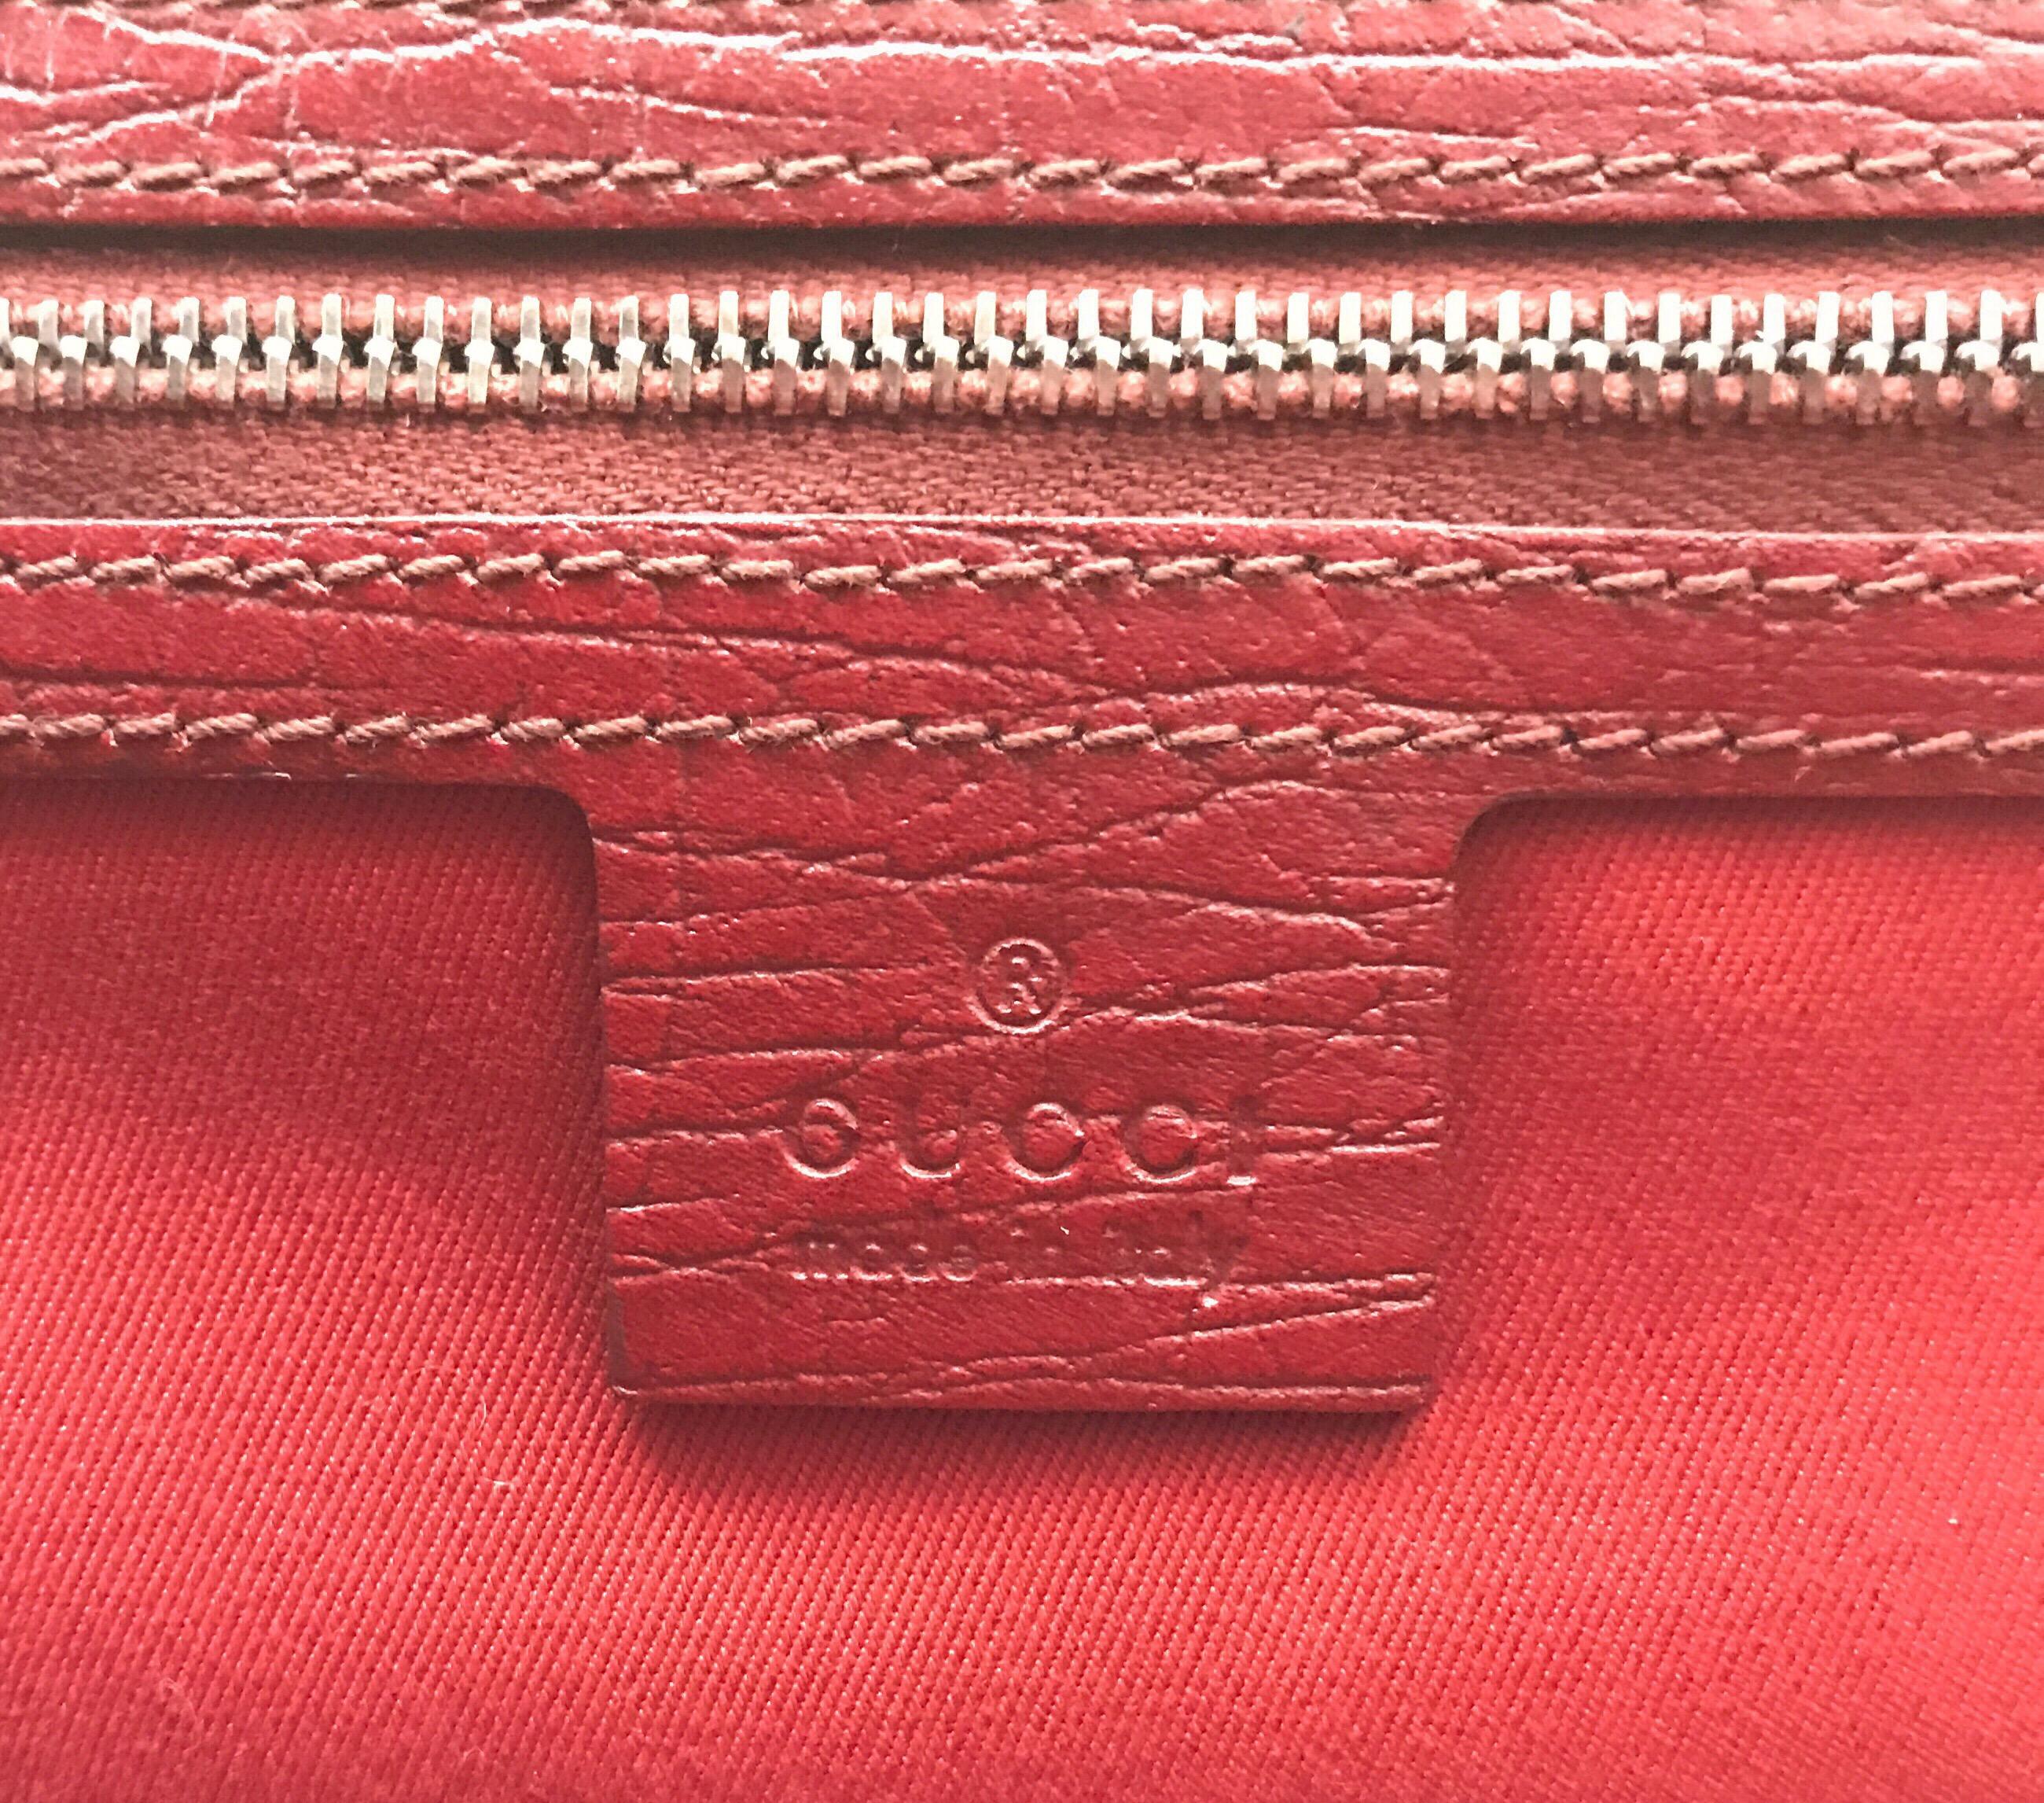 Gucci Red Monogram Leather Bamboo Bullet Handbag For Sale 4